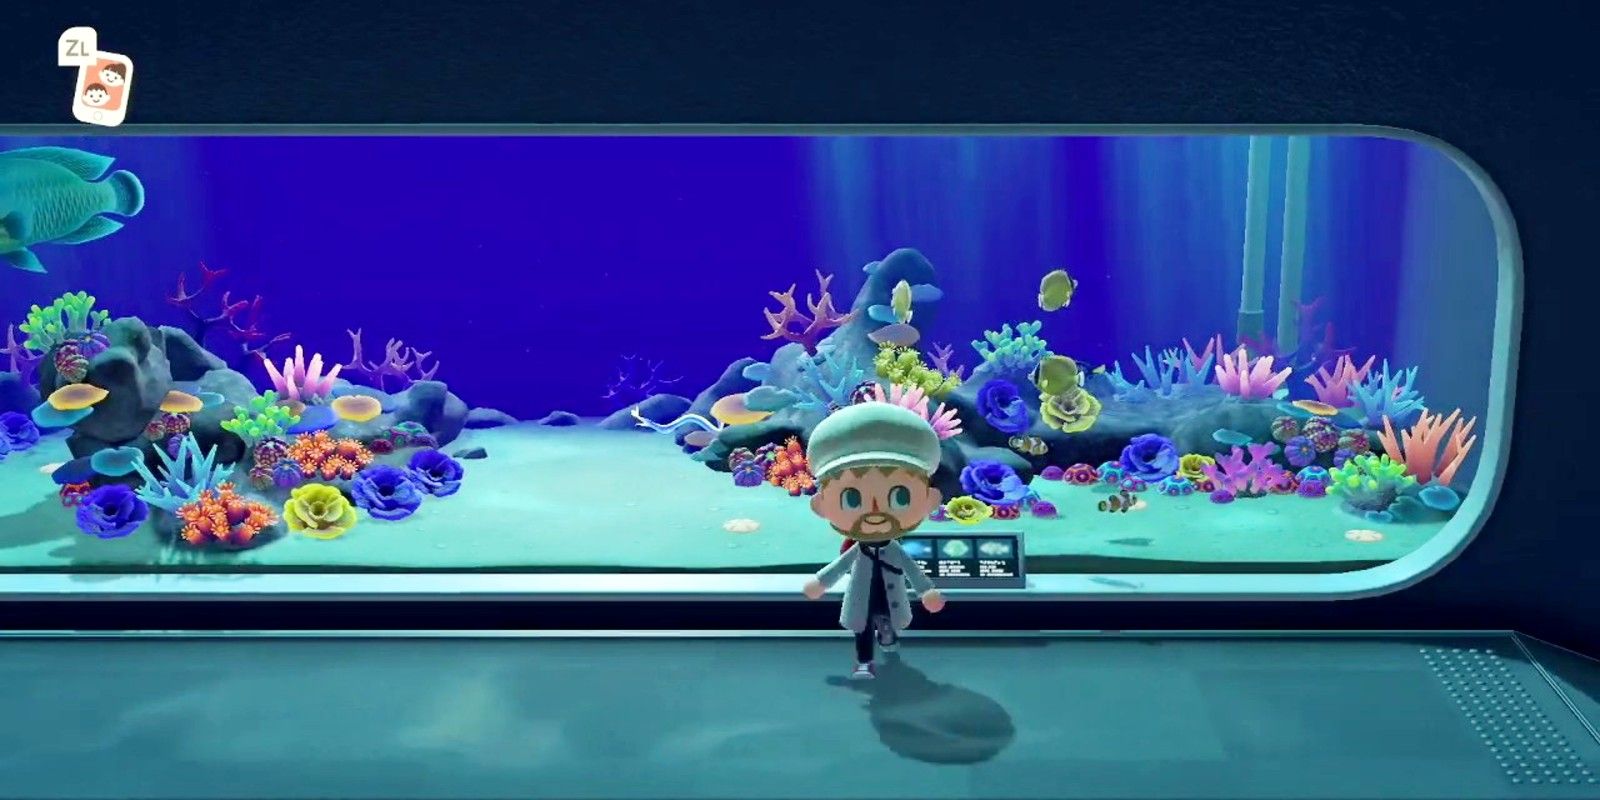 A player stands in front of a tank at the Fish Gallery in the museum in Animal Crossing: New Horizons